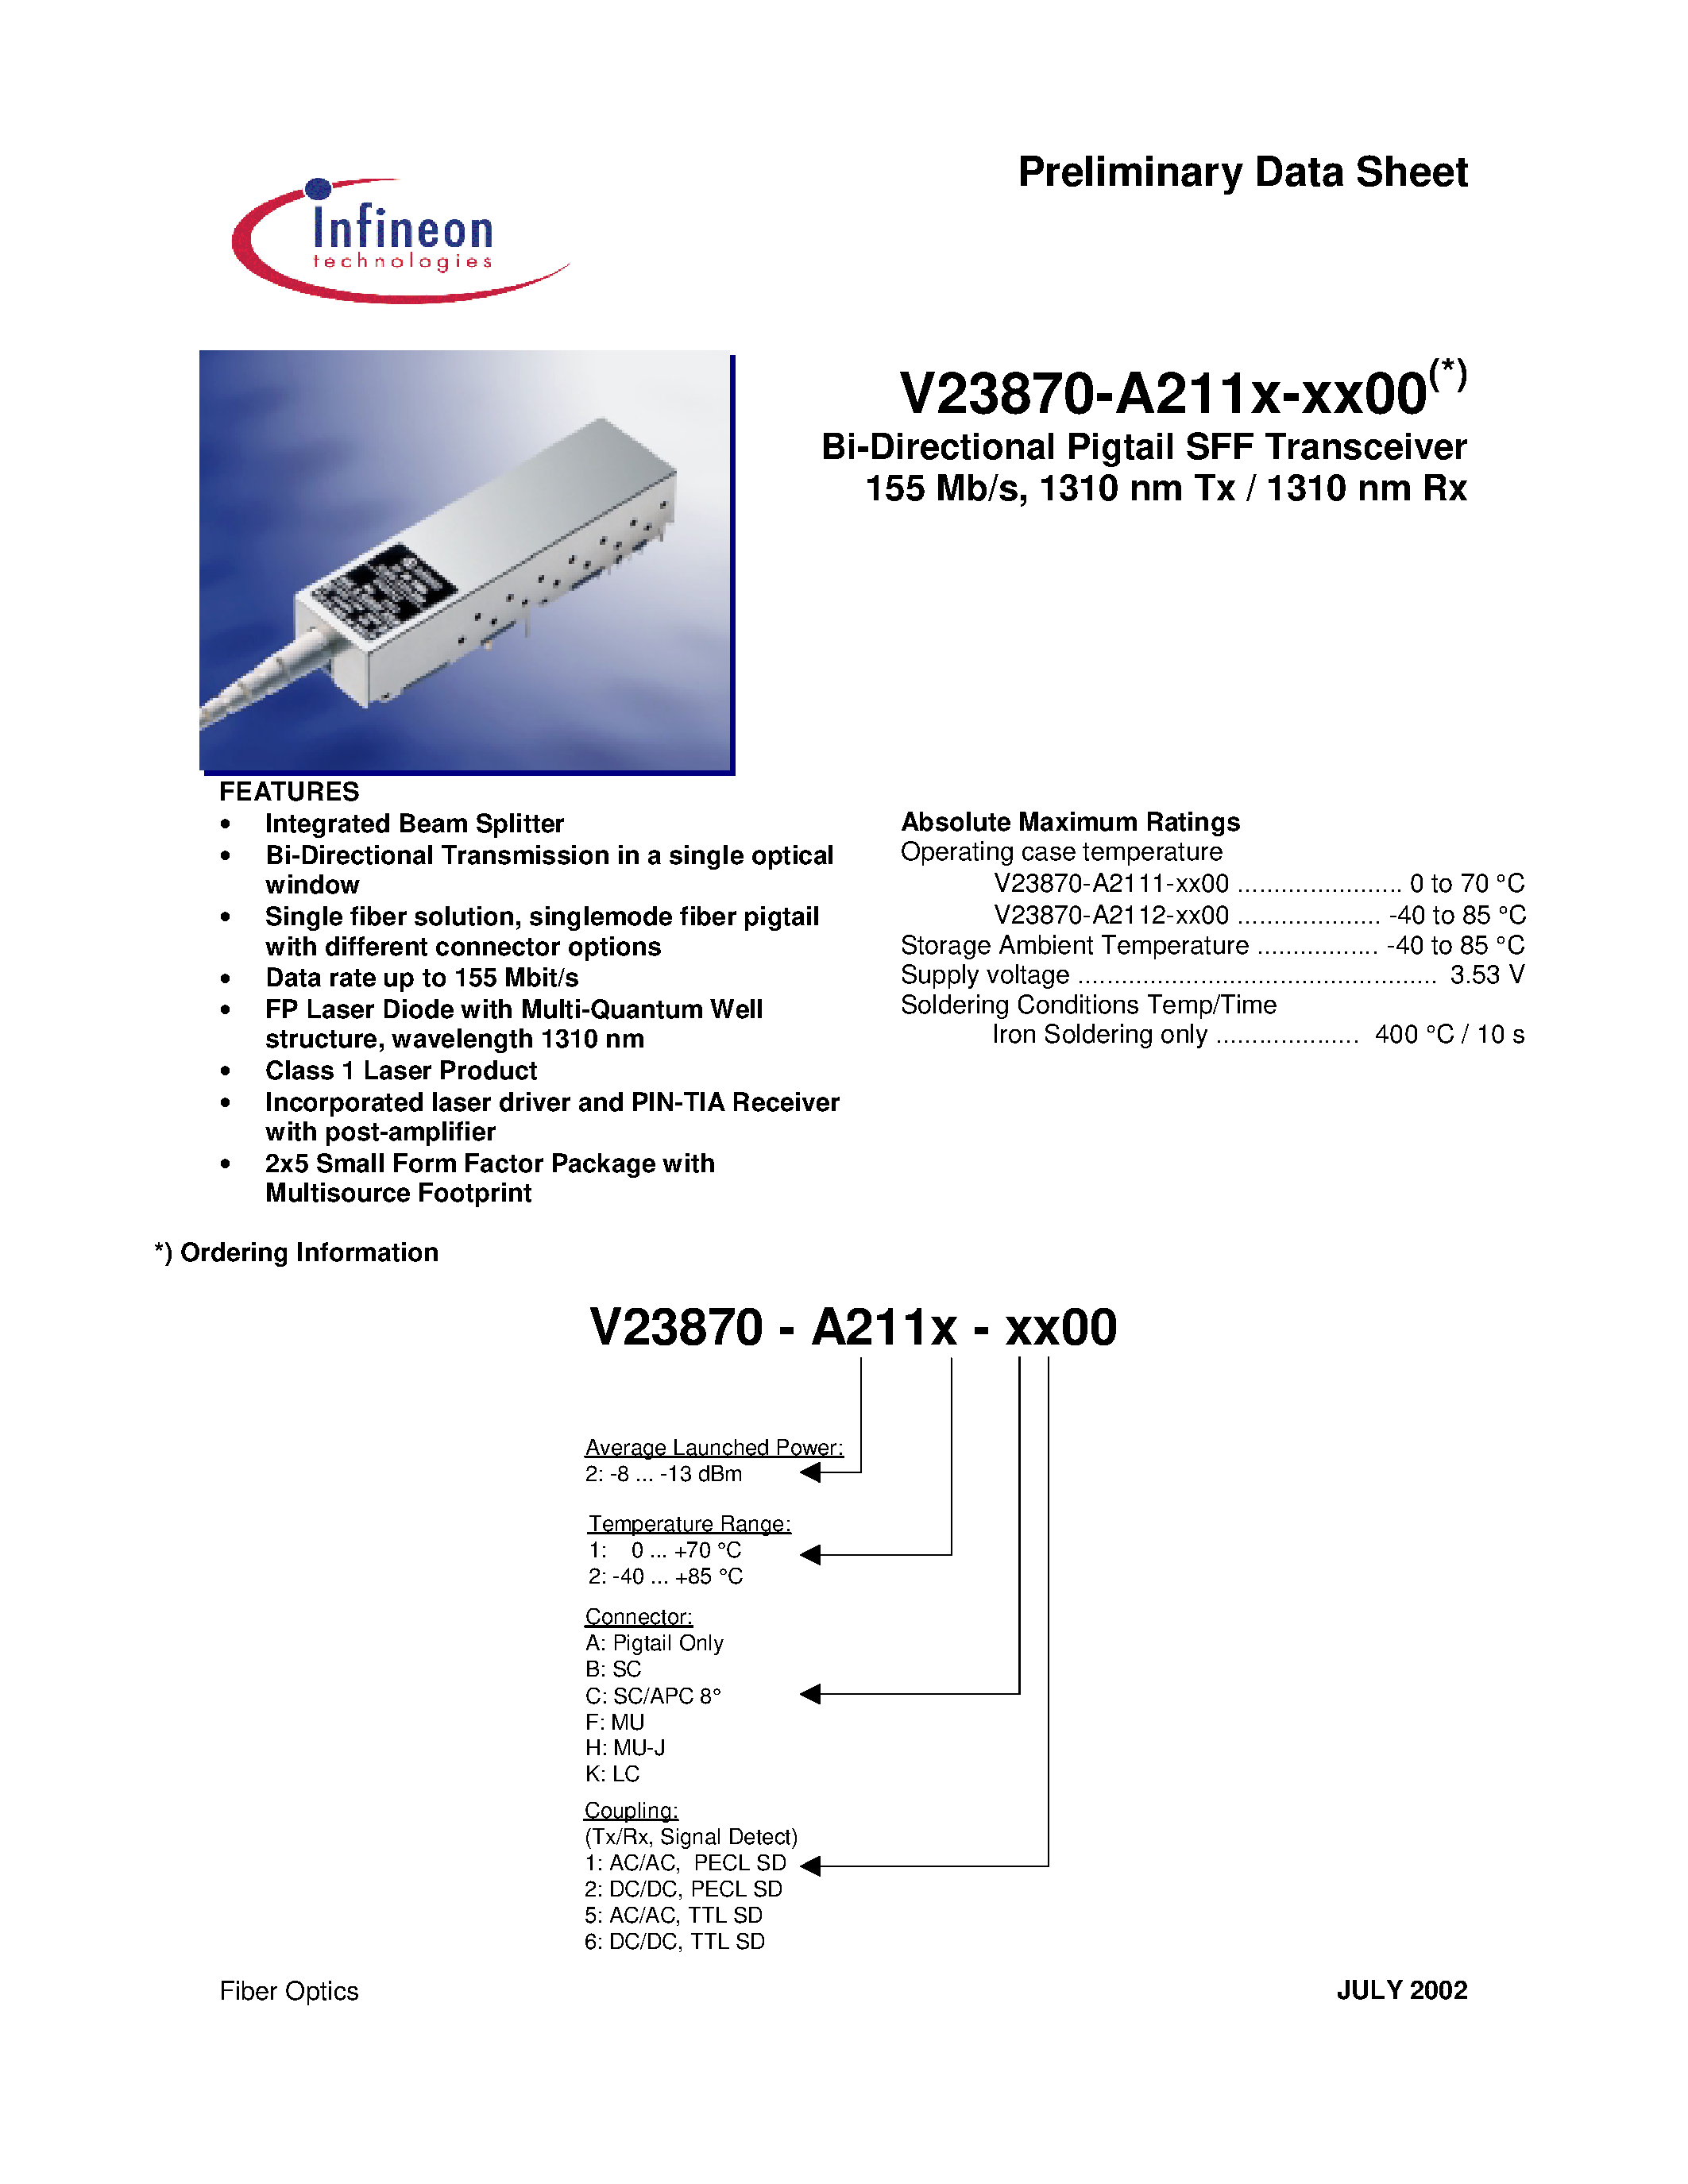 Datasheet V23870-A2111-F200 - Bi-Directional Pigtail SFF Transceiver 155 Mb/s/ 1310 nm Tx / 1310 nm Rx page 1